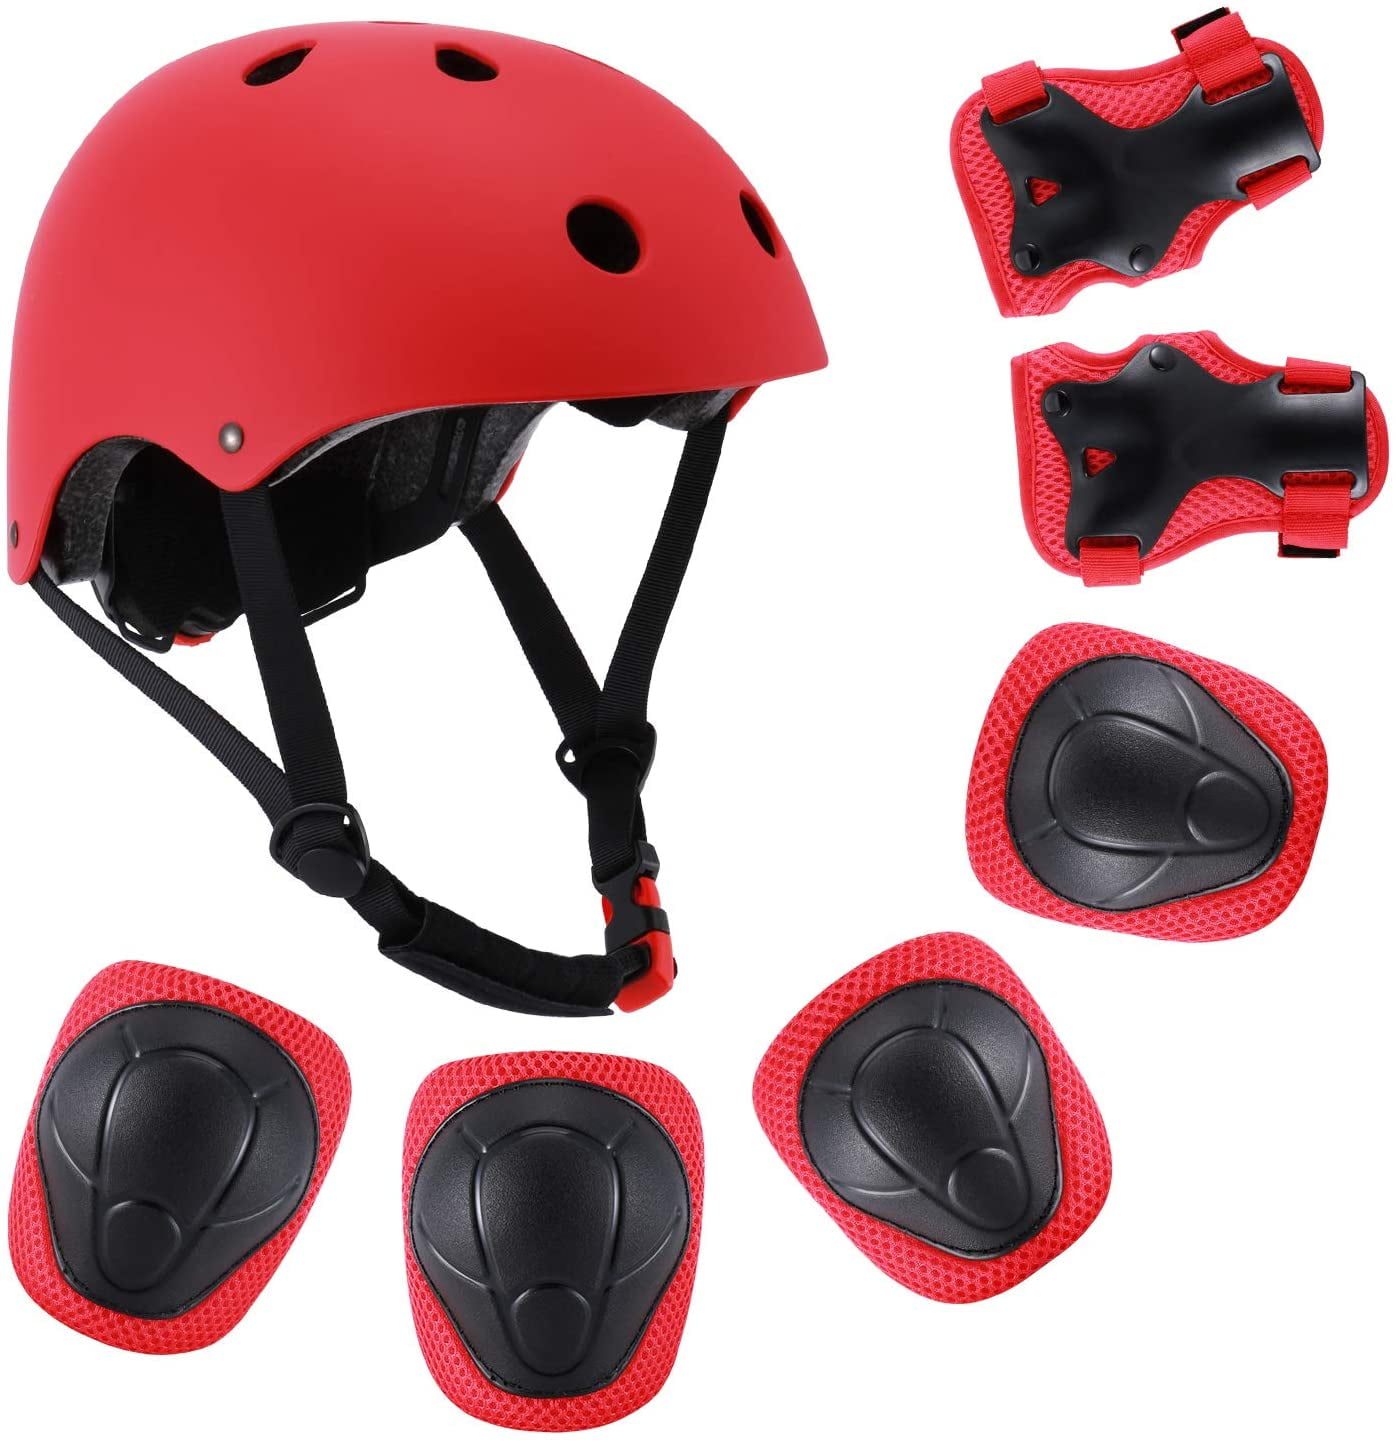 Abeja Kid Helmet Sets Bike Toddler Helmet for Ages 3-10 Boys&Girls with Sports Protective Gear Sets Wrist Knee Elbow Pads for Skateboard Cycling Scooter Rollerblading with CPSC&CE Certified 